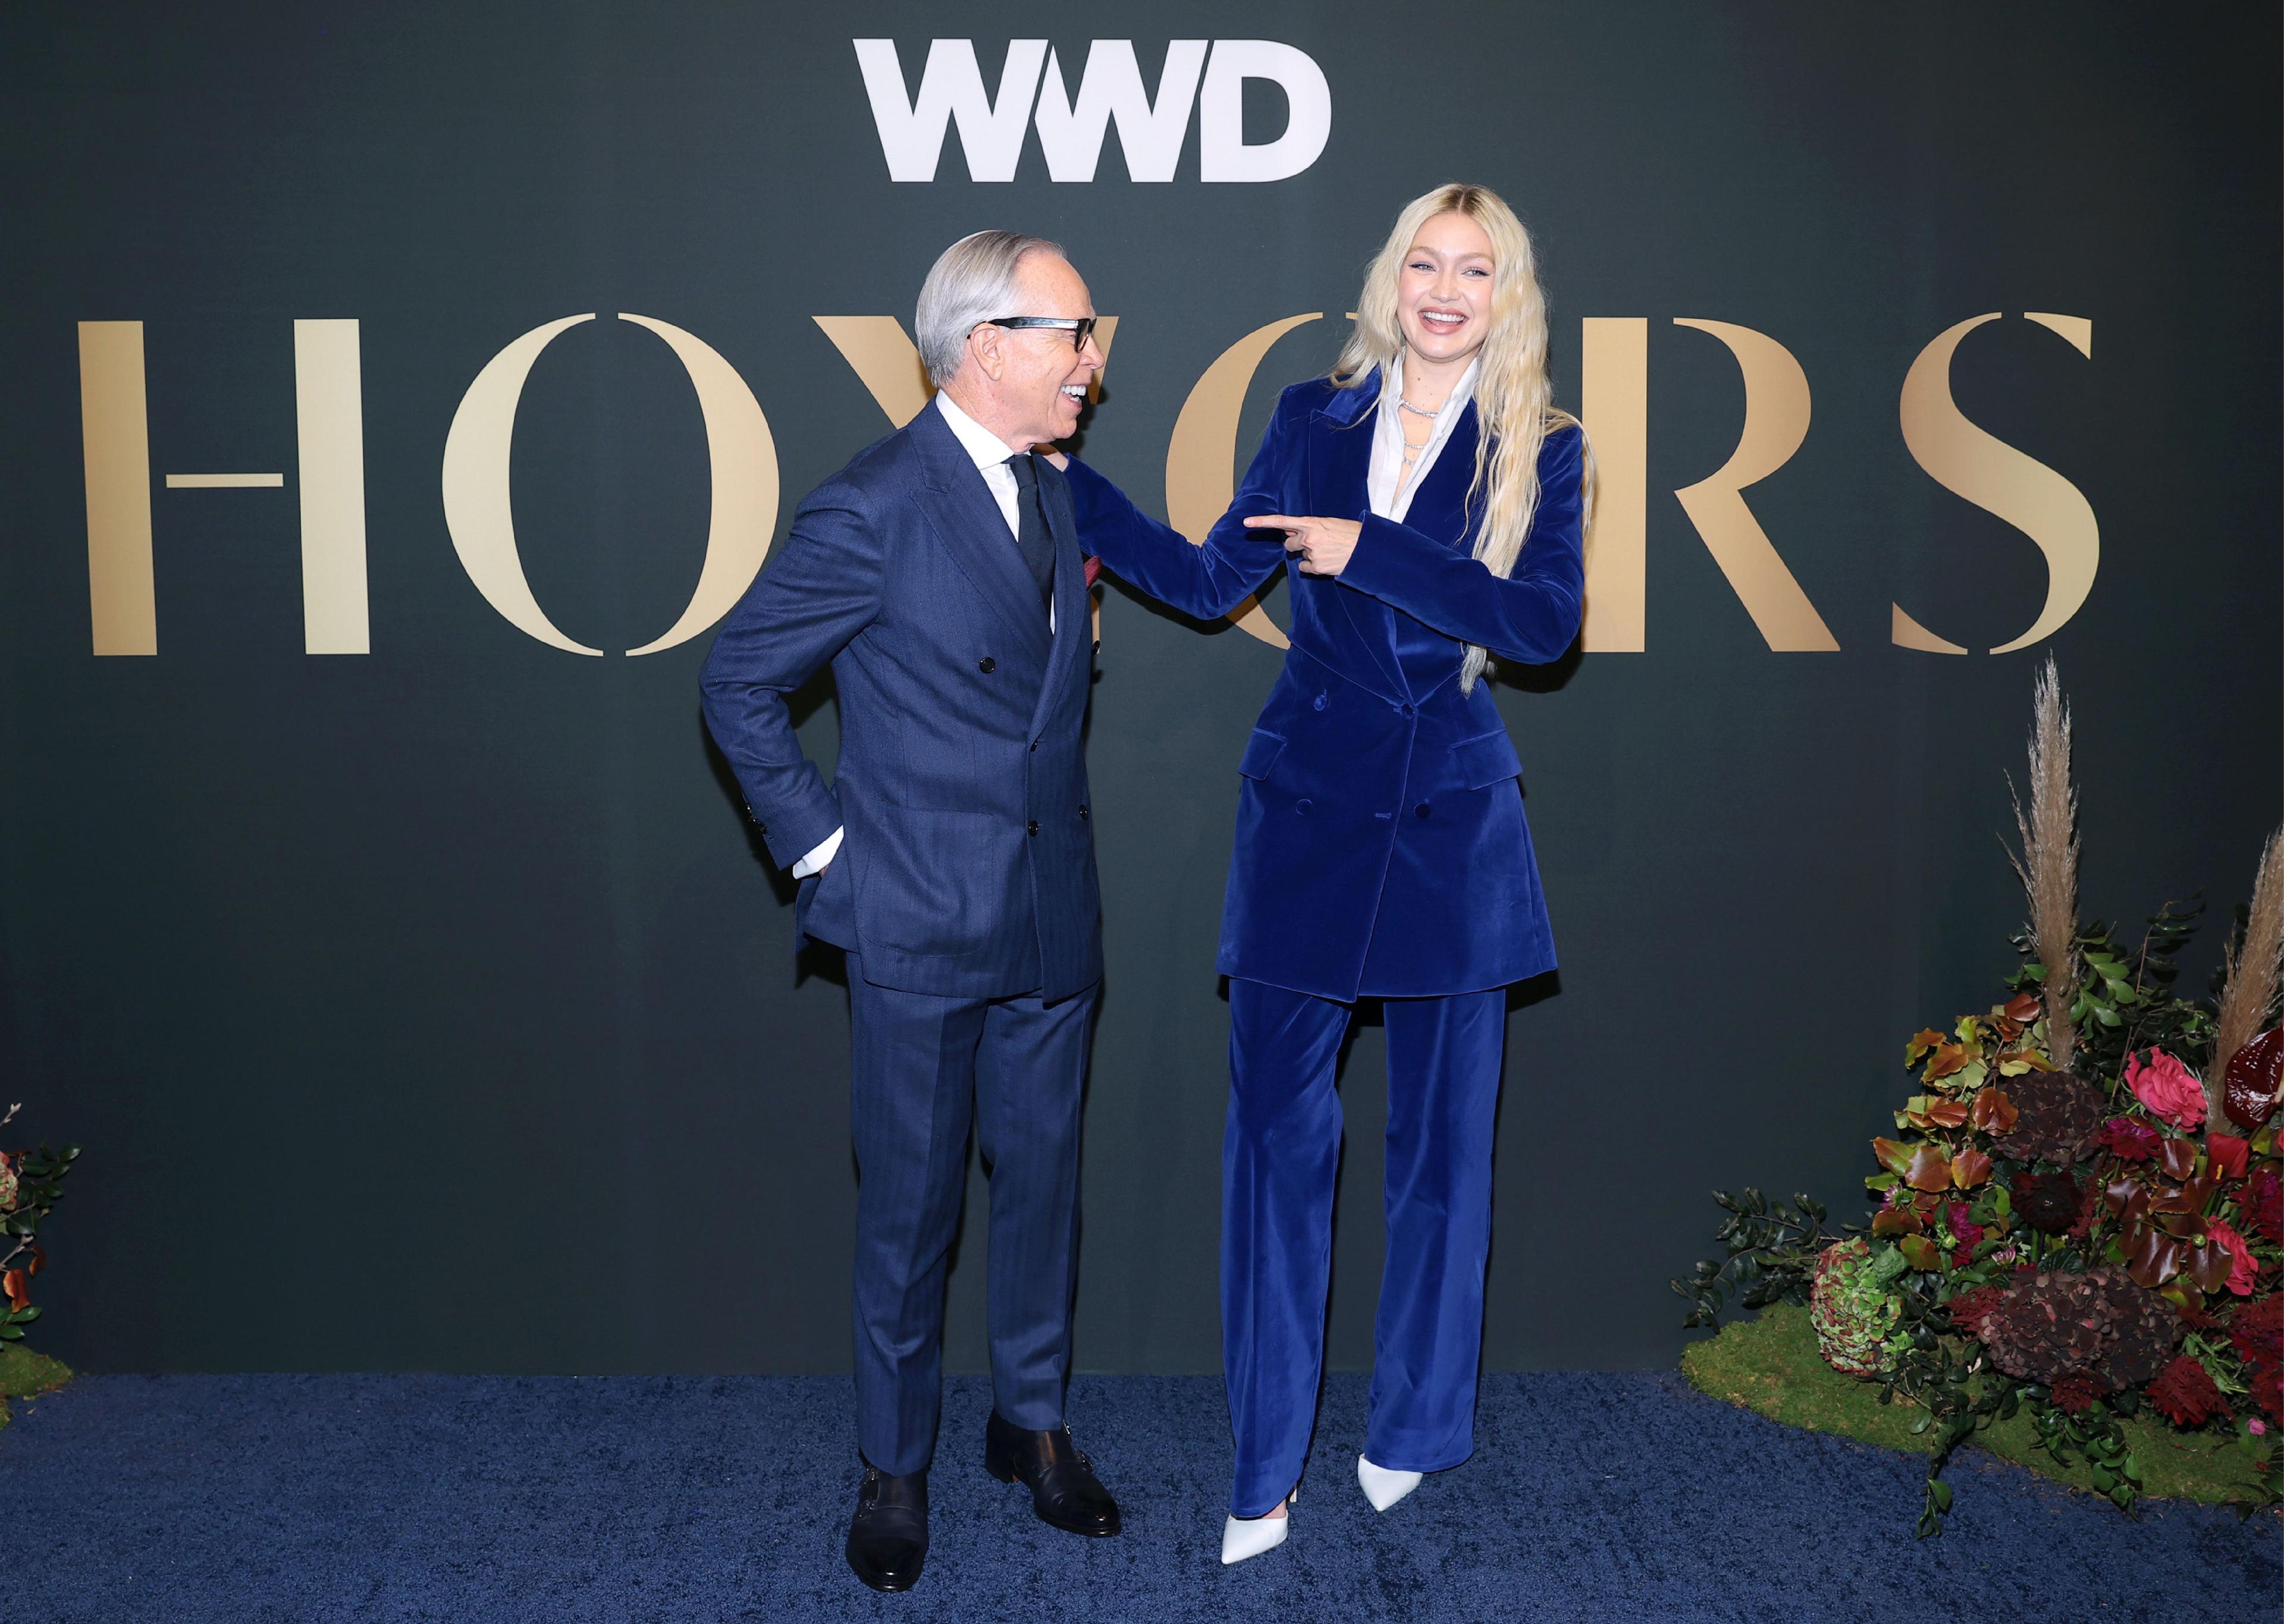 Tommy Hilfiger and Gigi Hadid standing in front of the WWD Honors stage backdrop